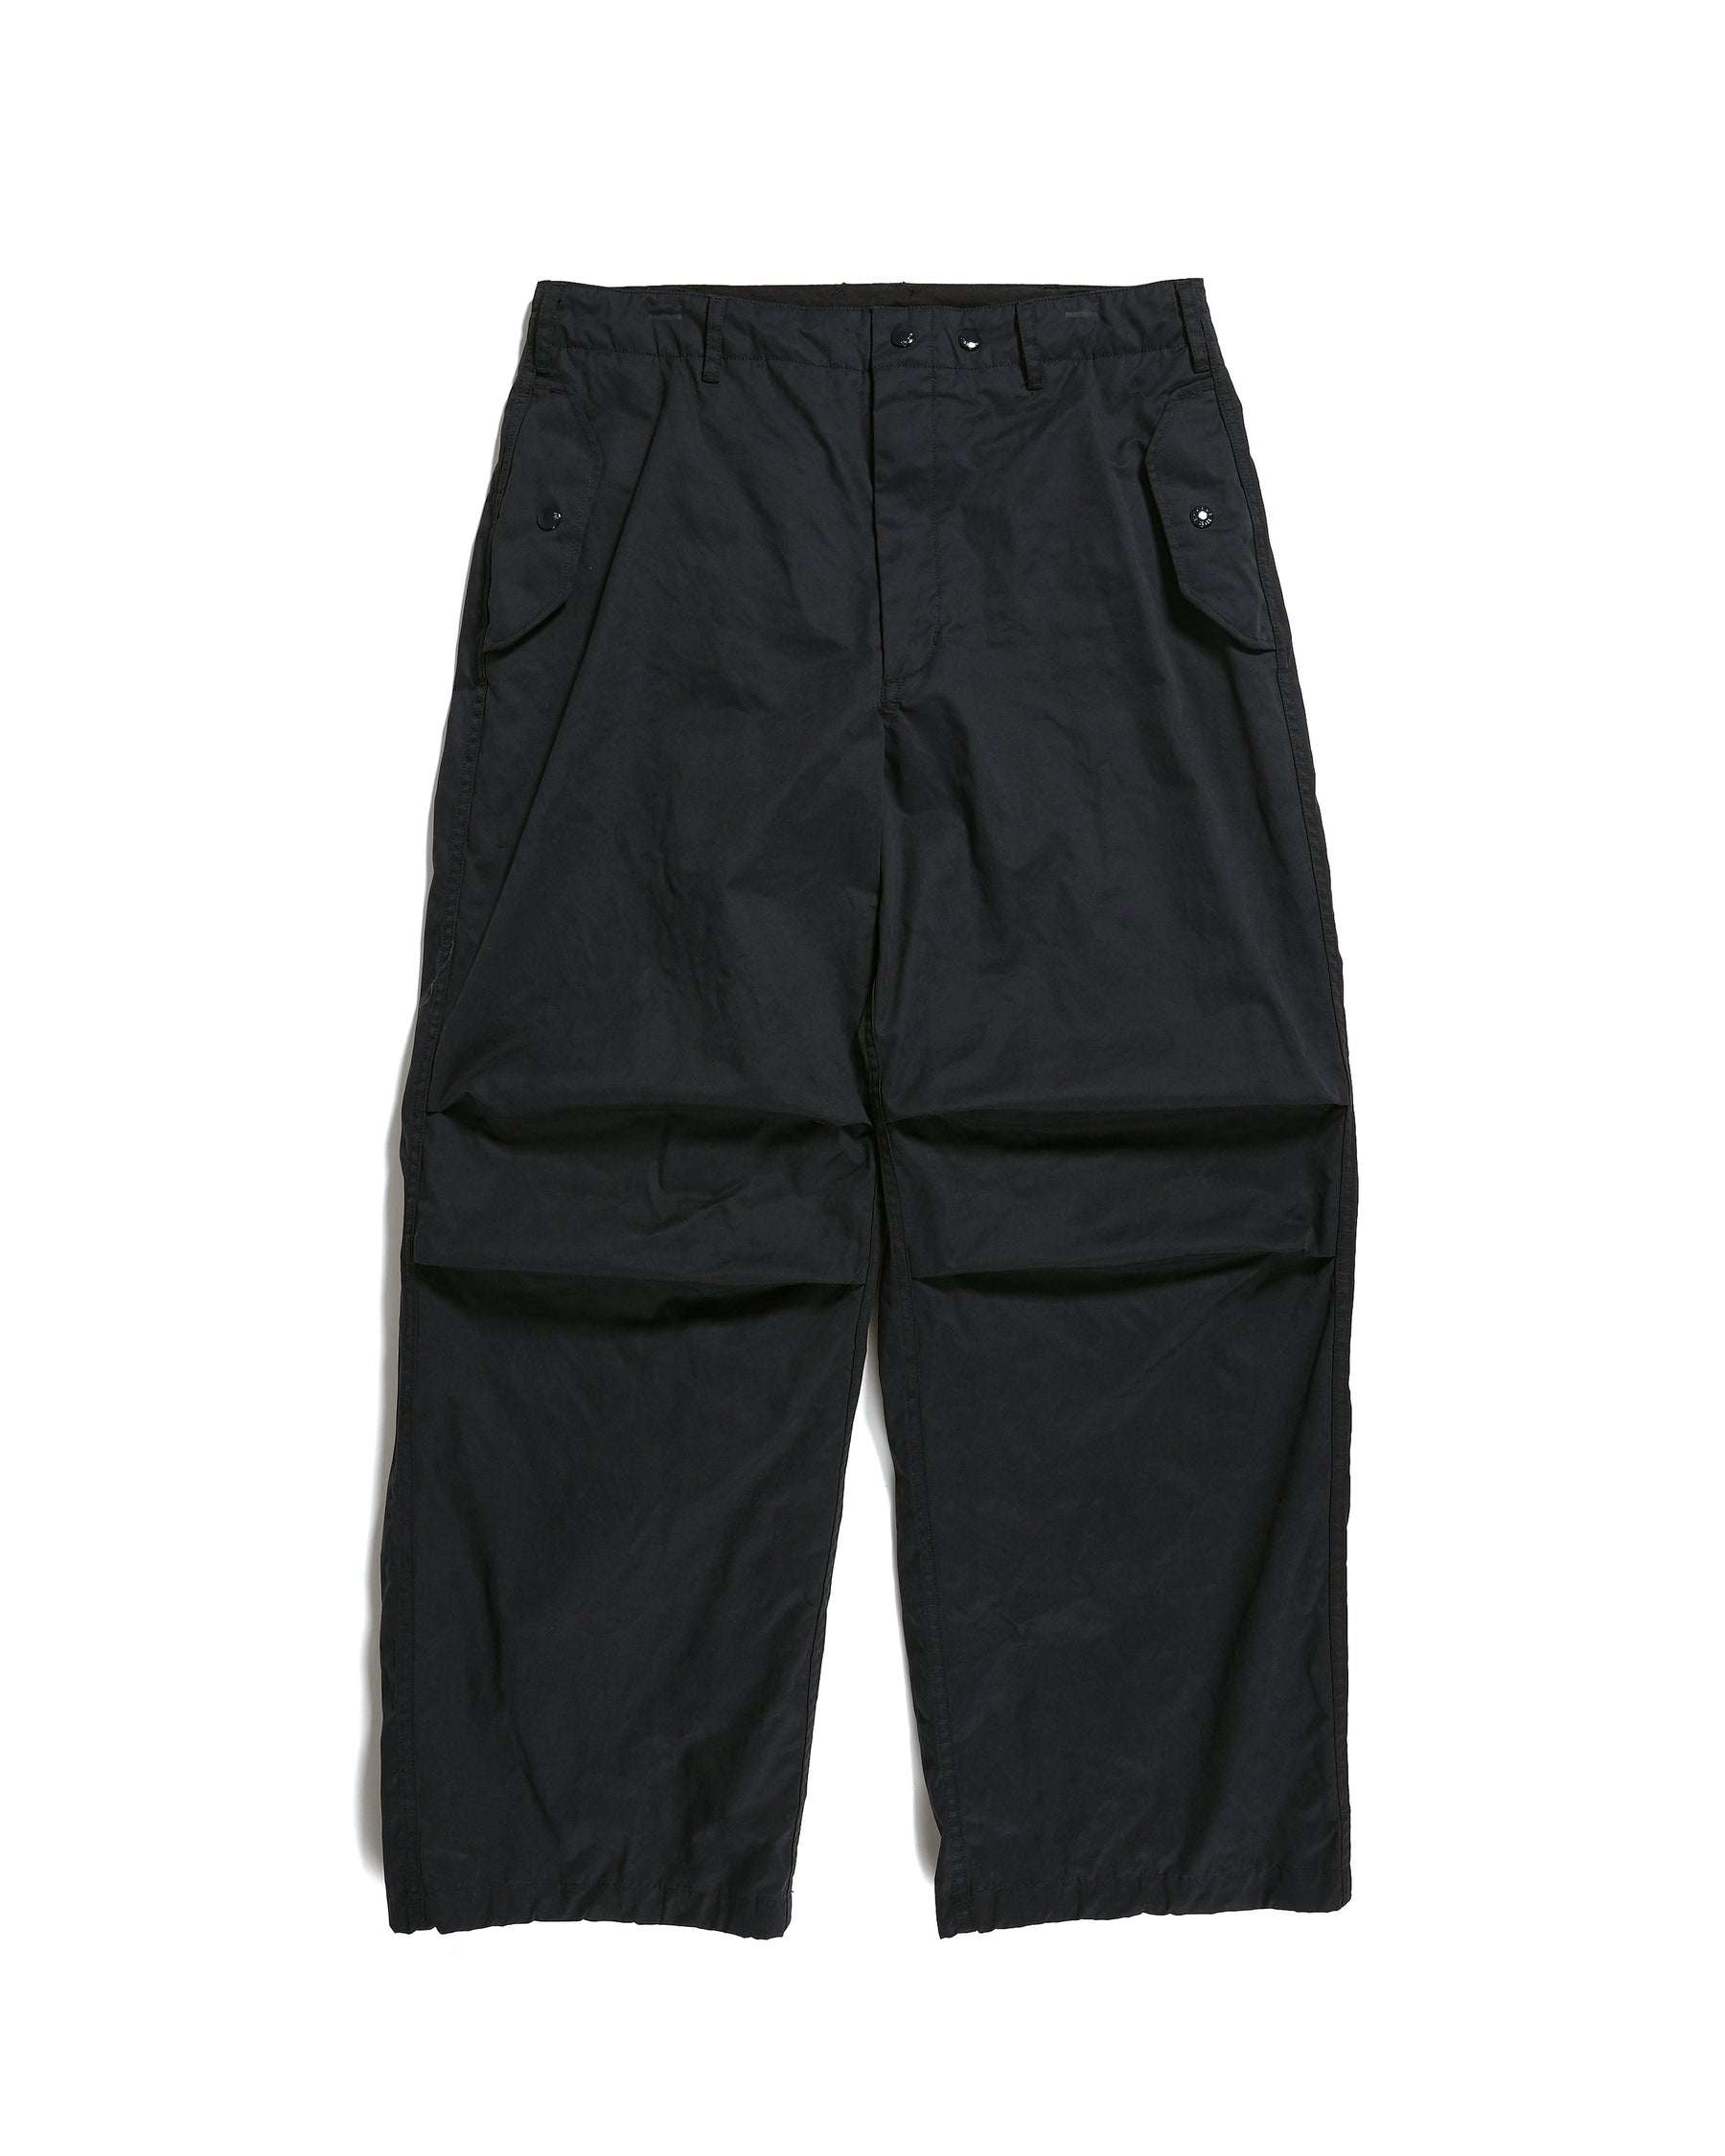 Over Pant in Dk. Navy PC Coated Cloth